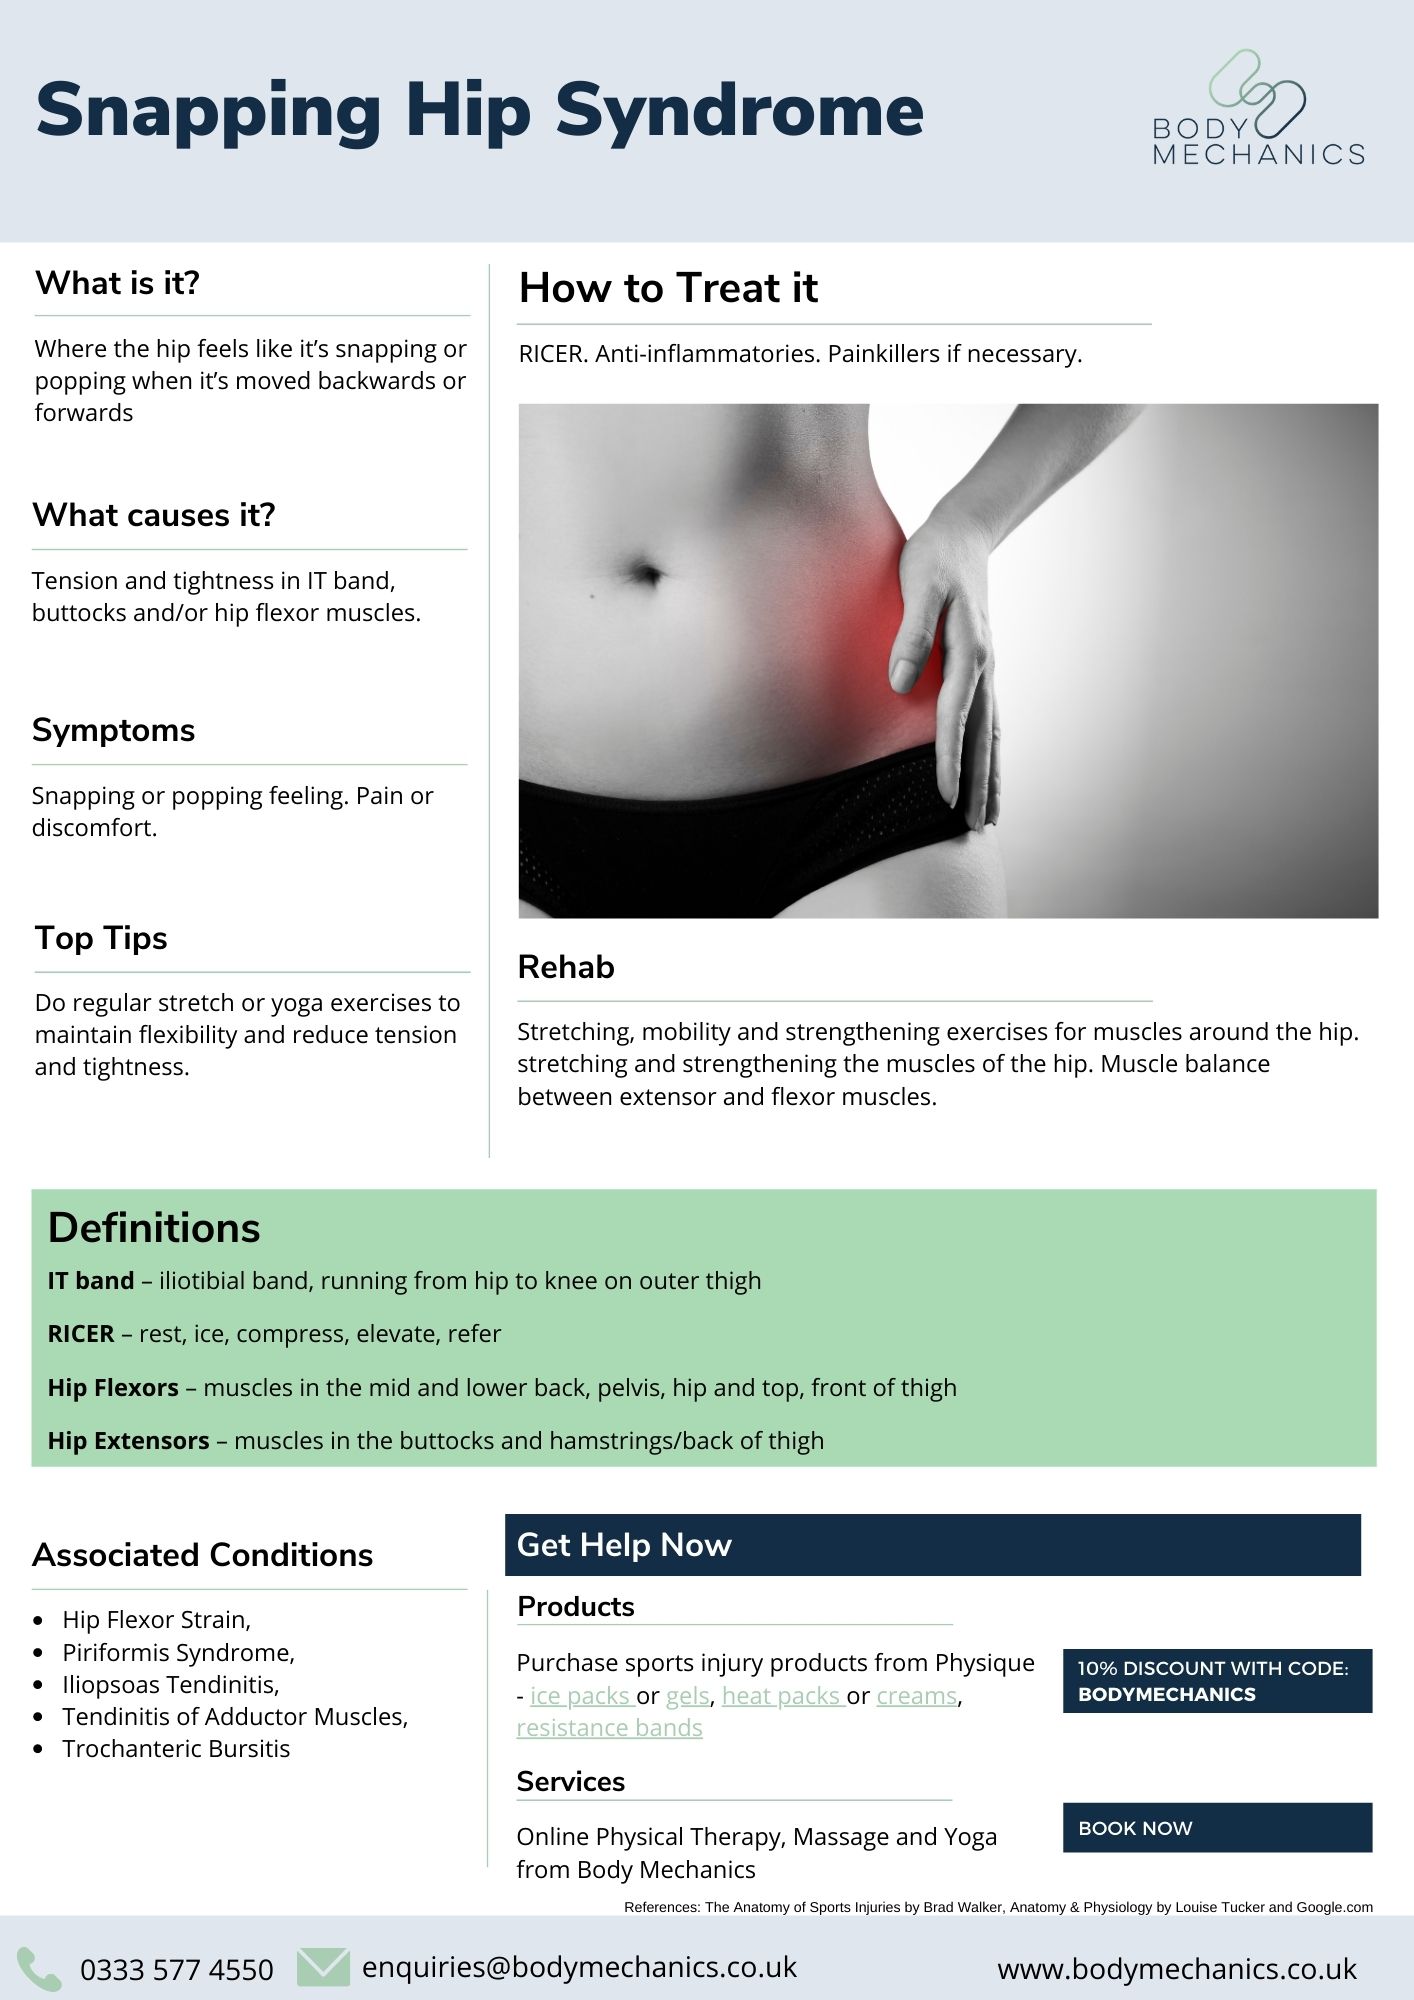 Snapping Hip Syndrome Infosheet